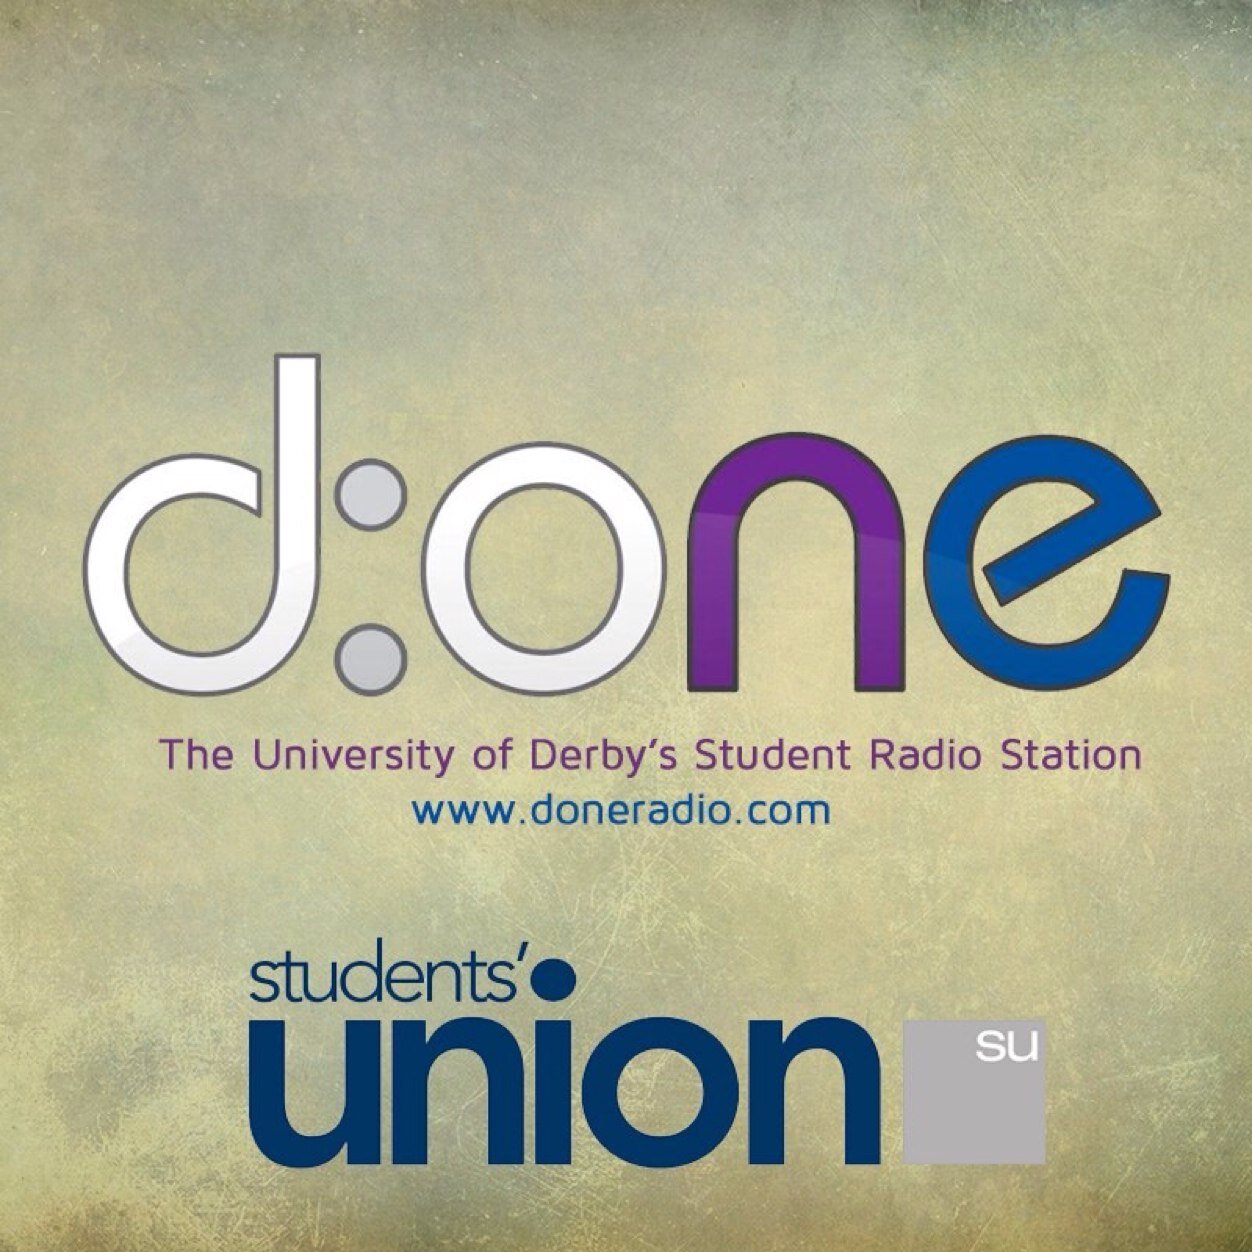 University of Derby's Student Radio Station. We broadcast from the Heart of Your Students' Union (@UDSU) every weekday from 10am until 9pm!